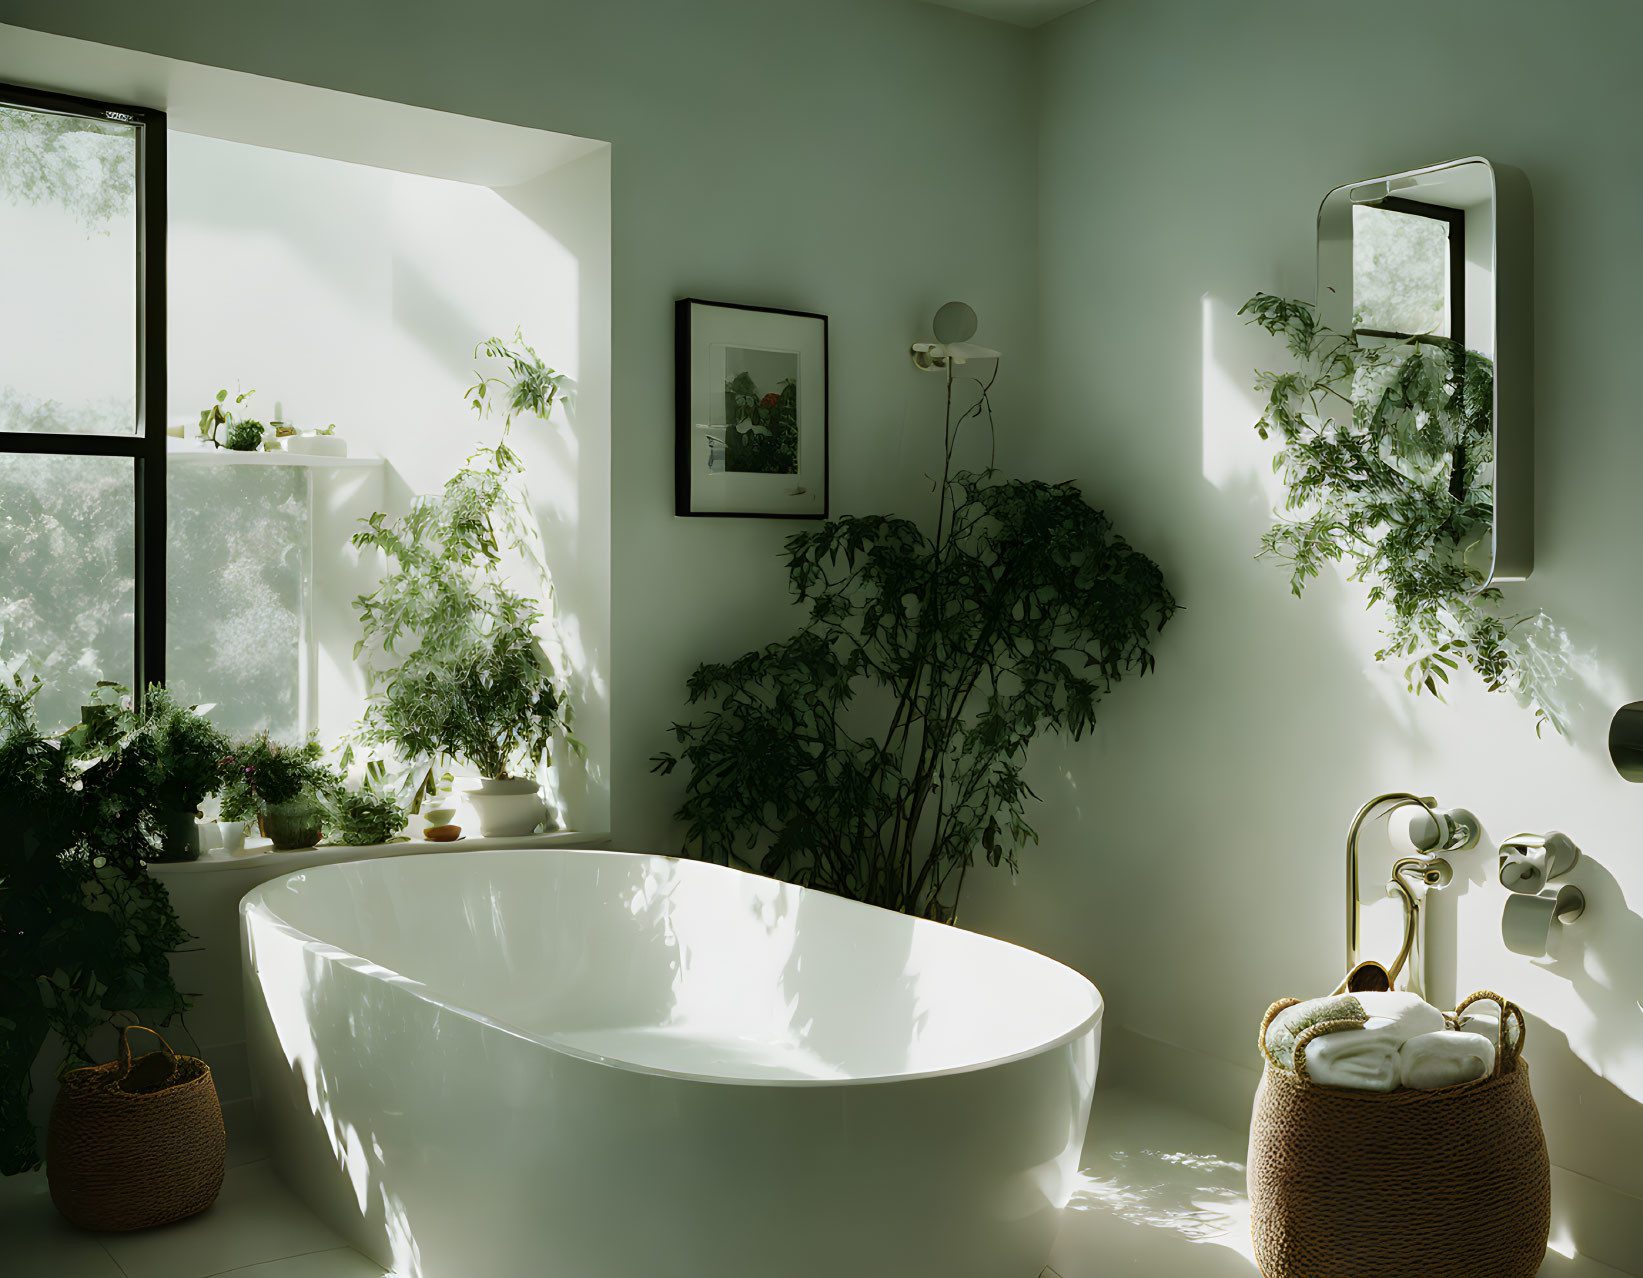 Tranquil bathroom with green plants, freestanding tub, and mirror